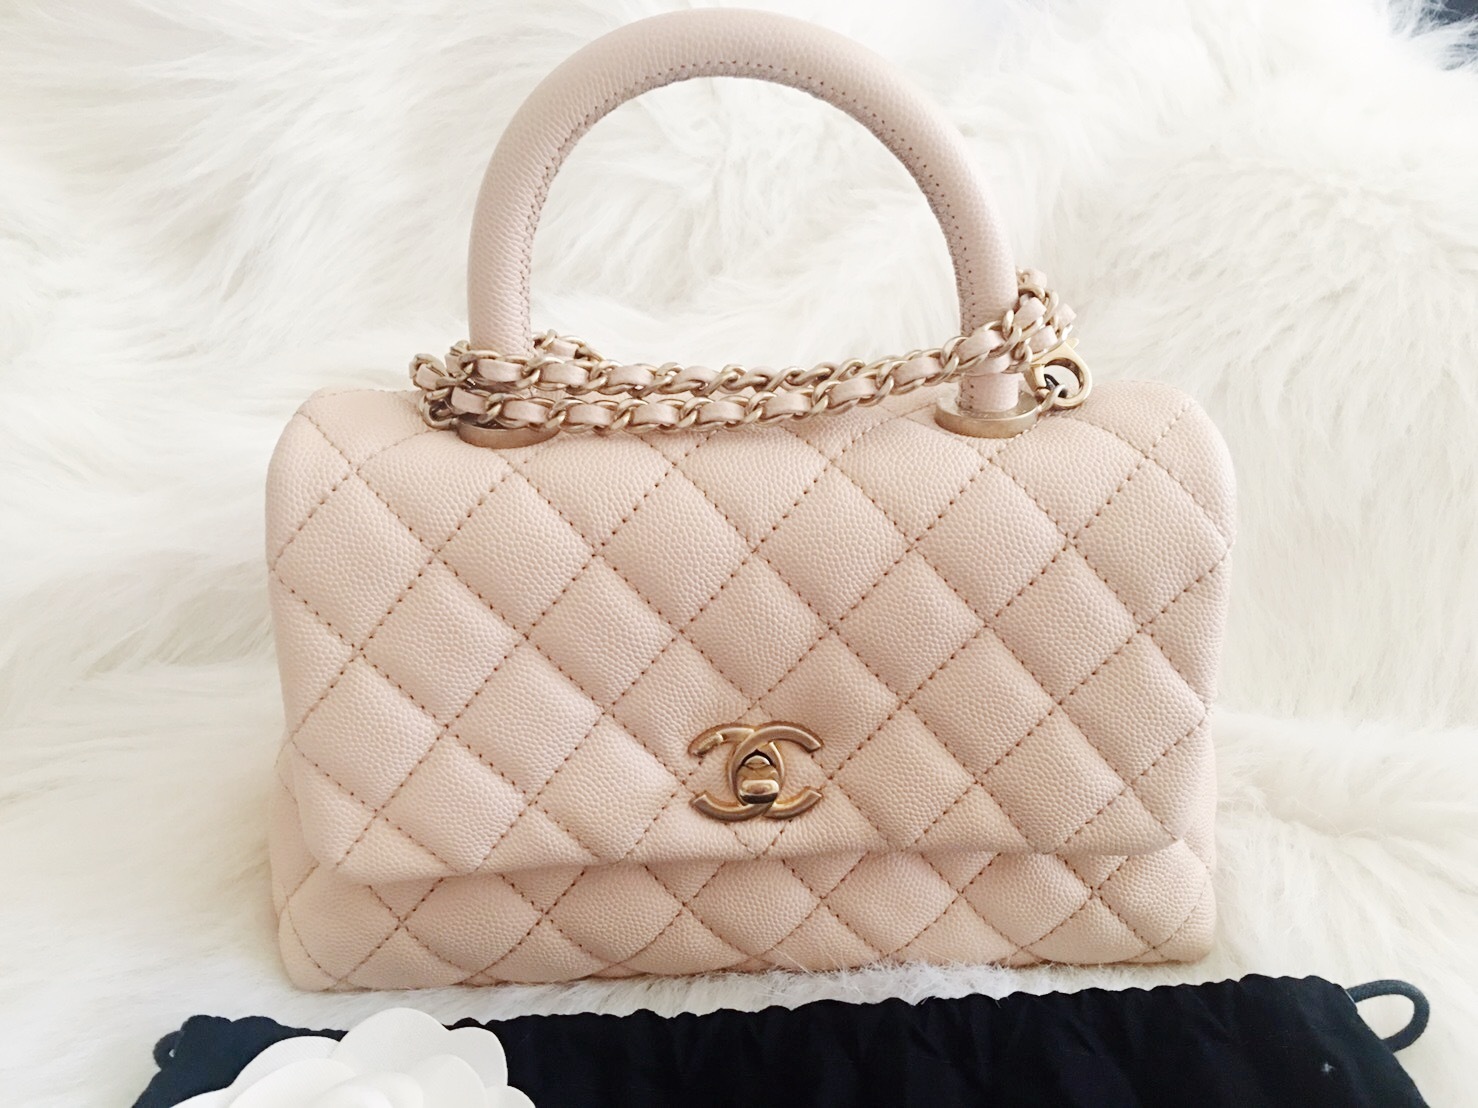 100% AUTHENTIC CHANEL 2017 CAVIAR QUILTED MINI COCO HANDLE FLAP BAG BEIGE GHW - Handbags & Purses